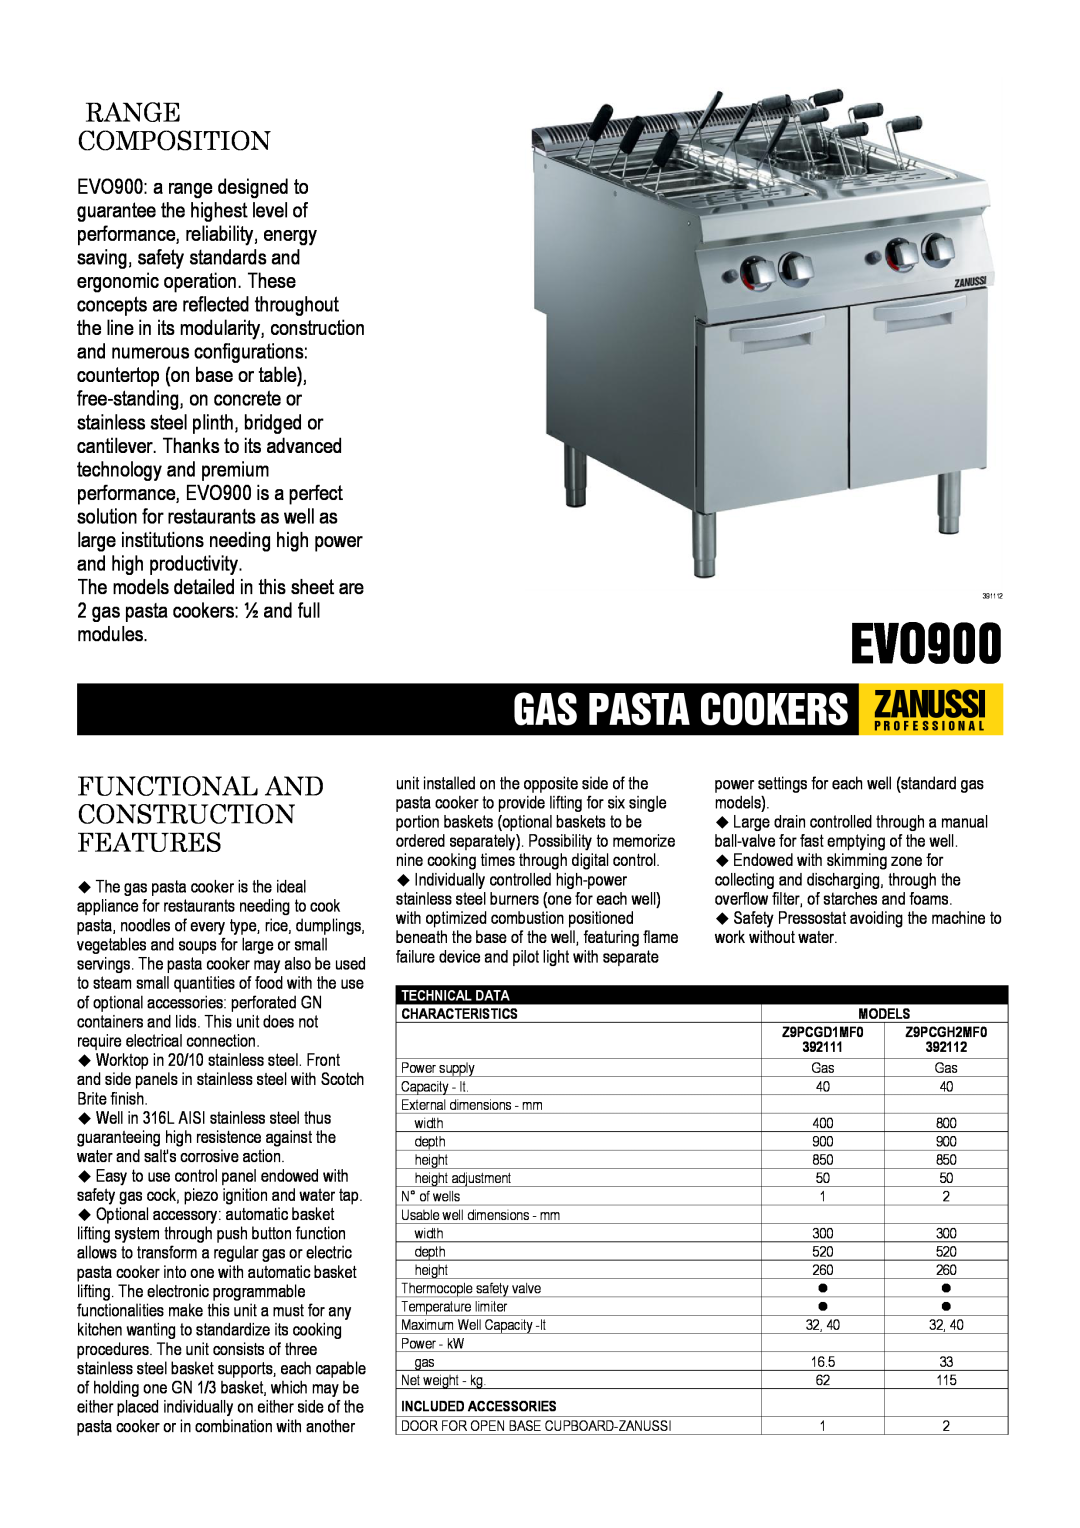 Zanussi EVO900 dimensions Range Composition, Functional And Construction Features 